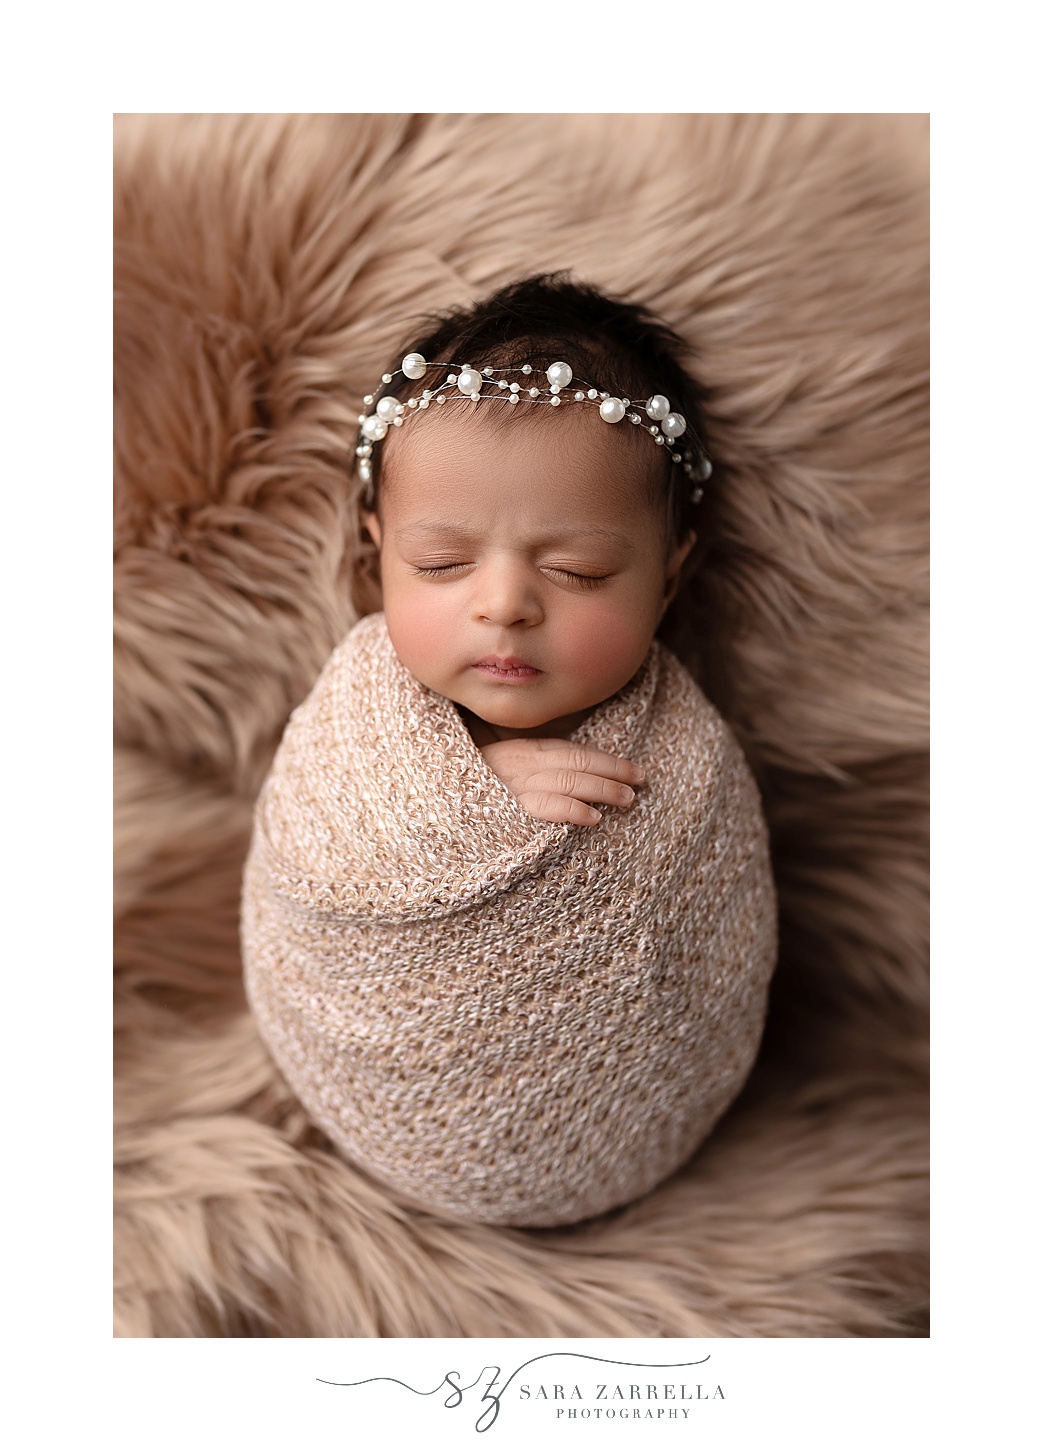 baby girl sleeps wrapped up during newborn portraits in RI studio